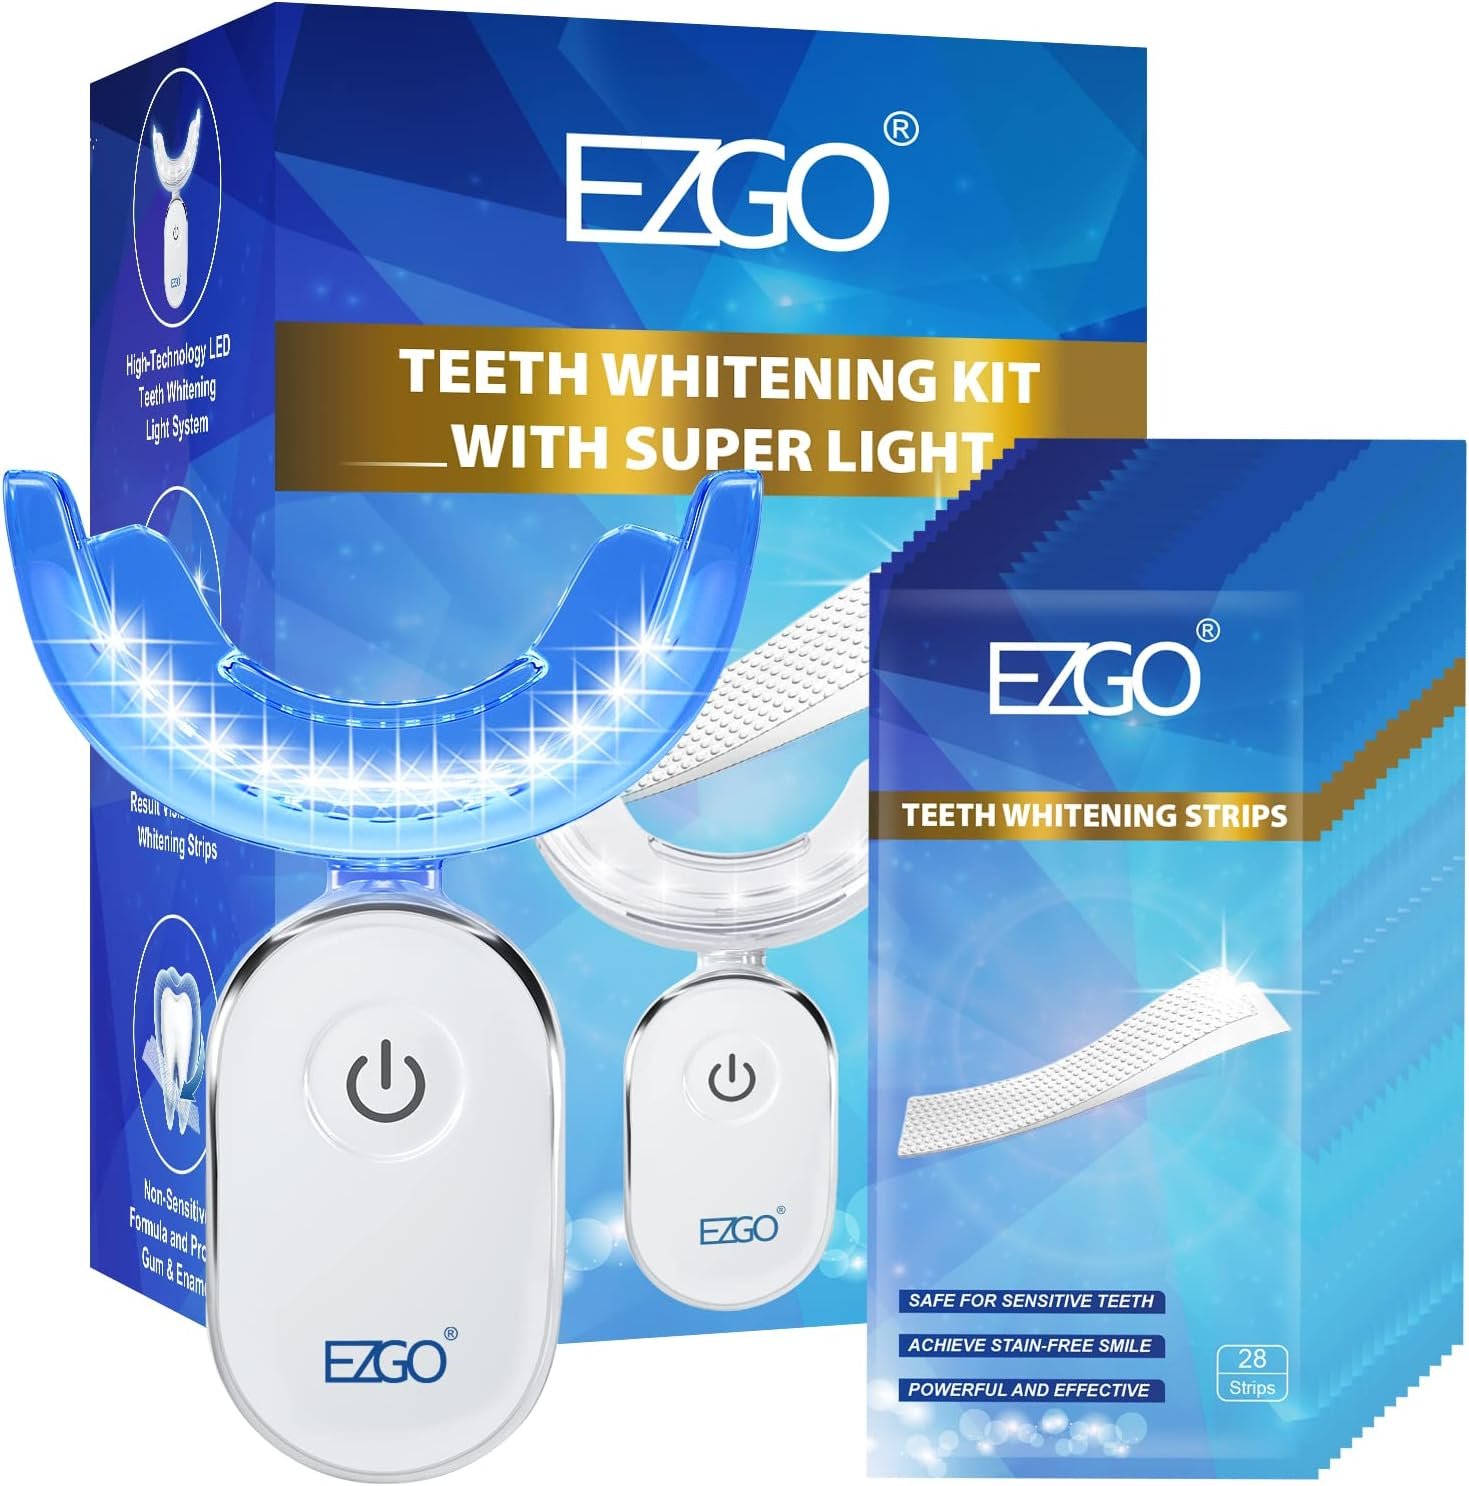 EZGO Teeth Whitening Kit with LED Light, Non-Sensitive Teeth Whitener with 1 Month Teeth Whitening Strip, 28LED Teeth Whitening Light, Help to Remove Teeth Stains from Coffee, Tea and Wine (28Count)